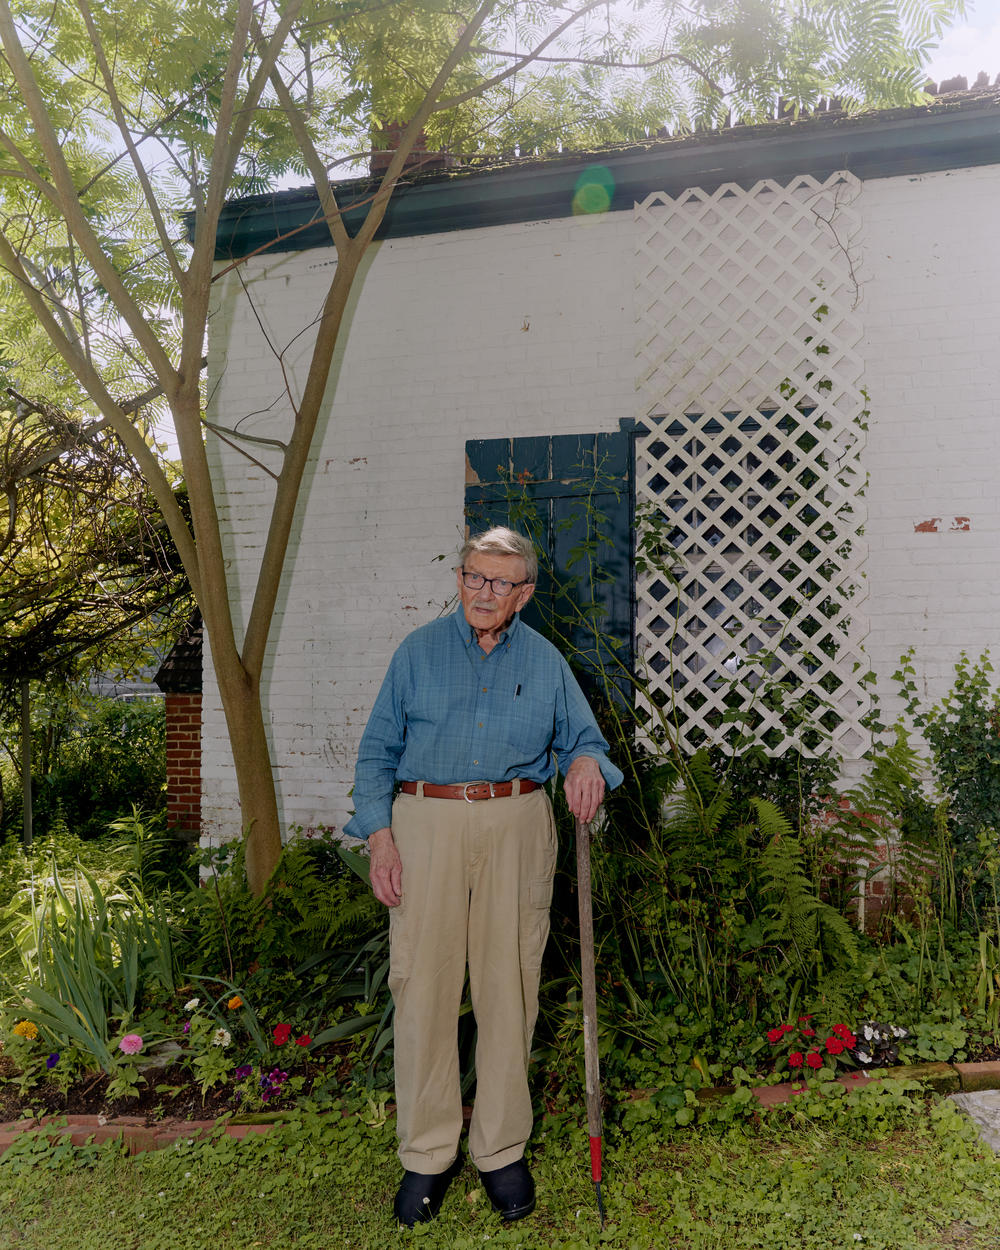 Brown poses for a portrait outside his home.